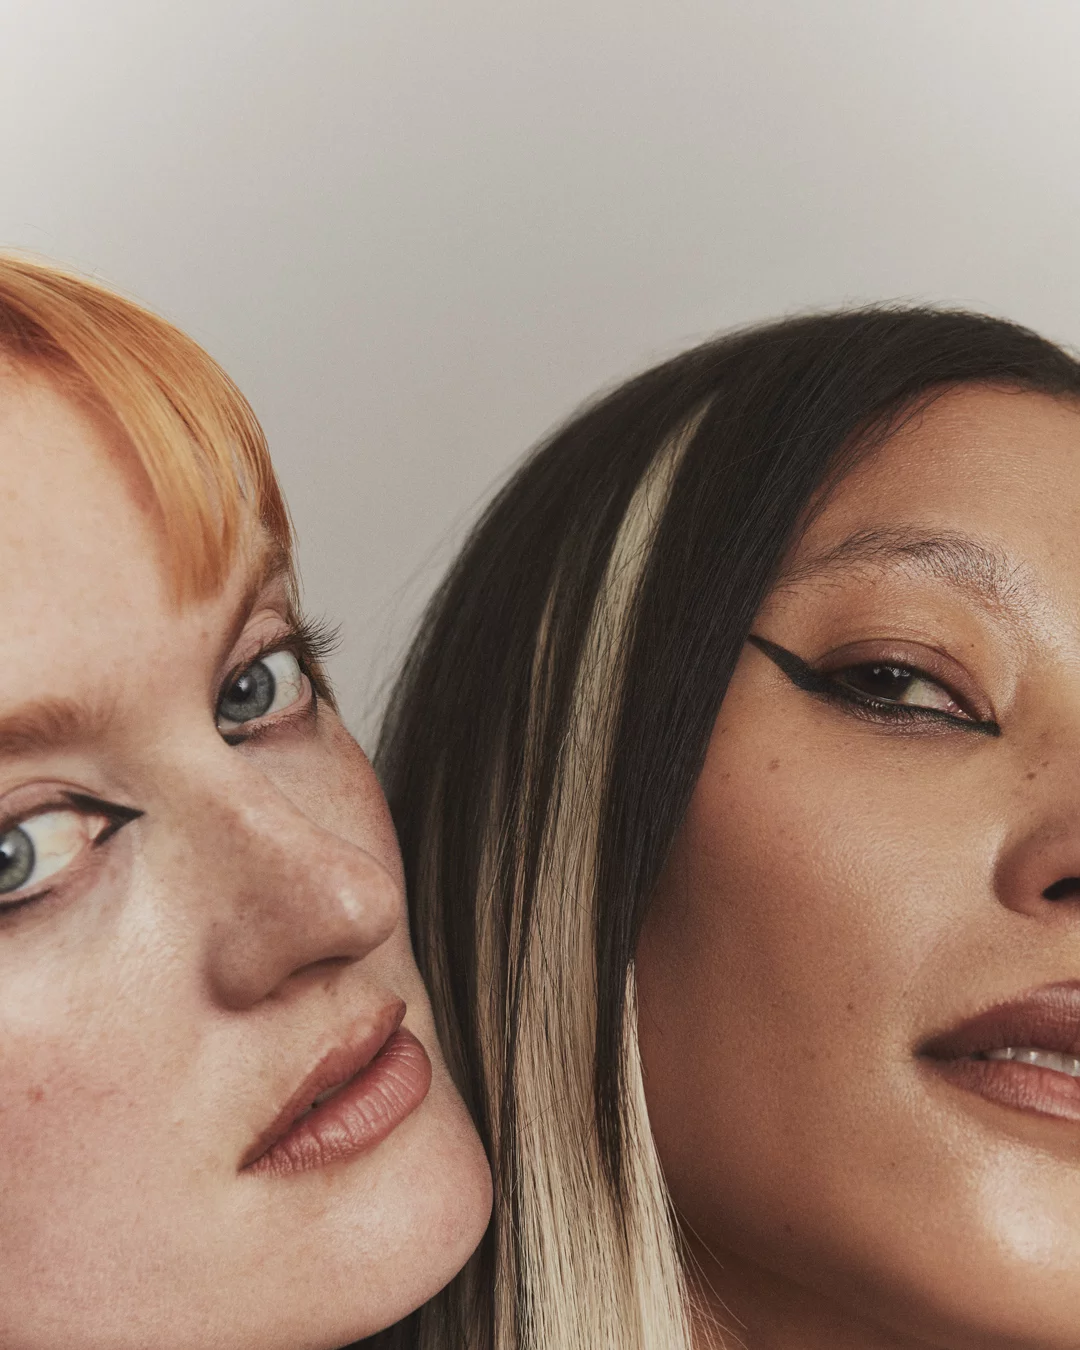 The Forumist w/ Icona Pop 1 by Pelle LANNEFORS